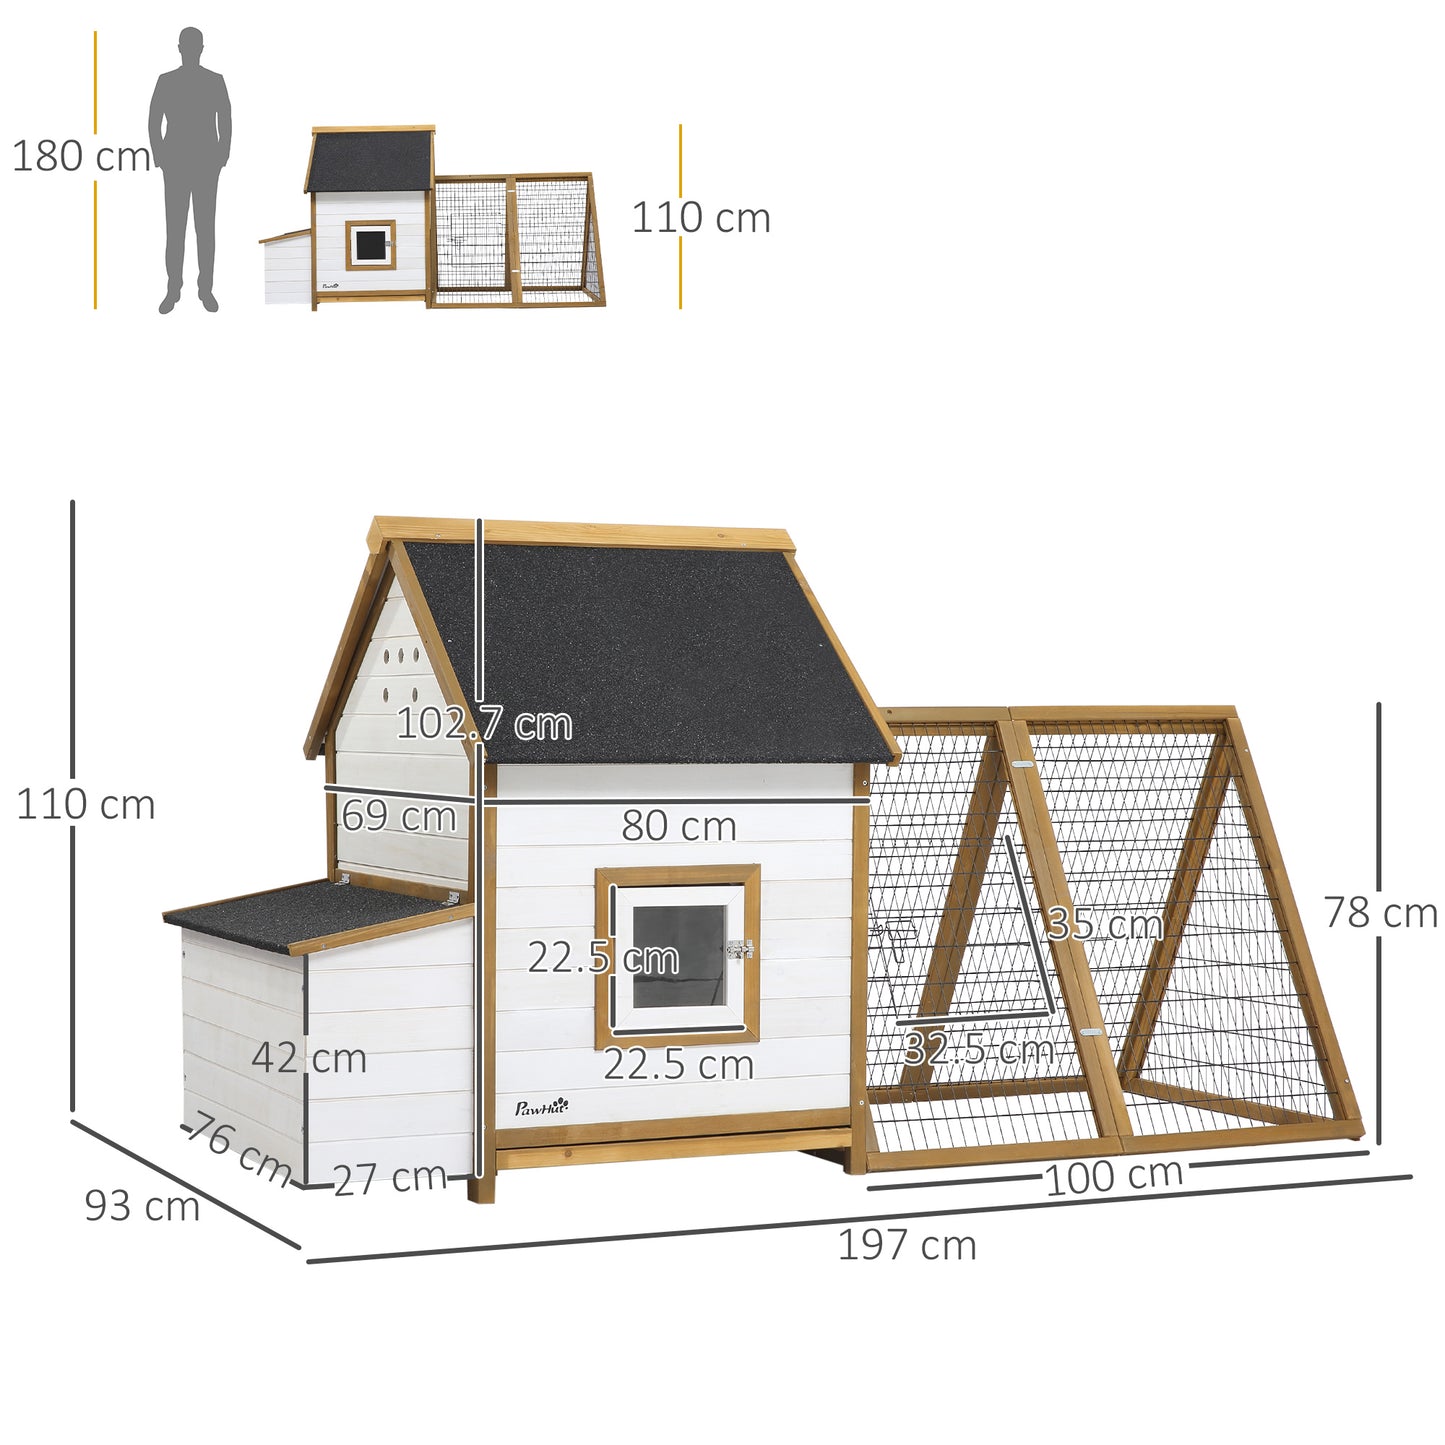 PawHut Chicken Coop, Hen House, Wooden Poultry Cage with Outdoor Run, Nesting Box, Removable Tray, Window and Lockable Door, 197 x 93 x 110cm